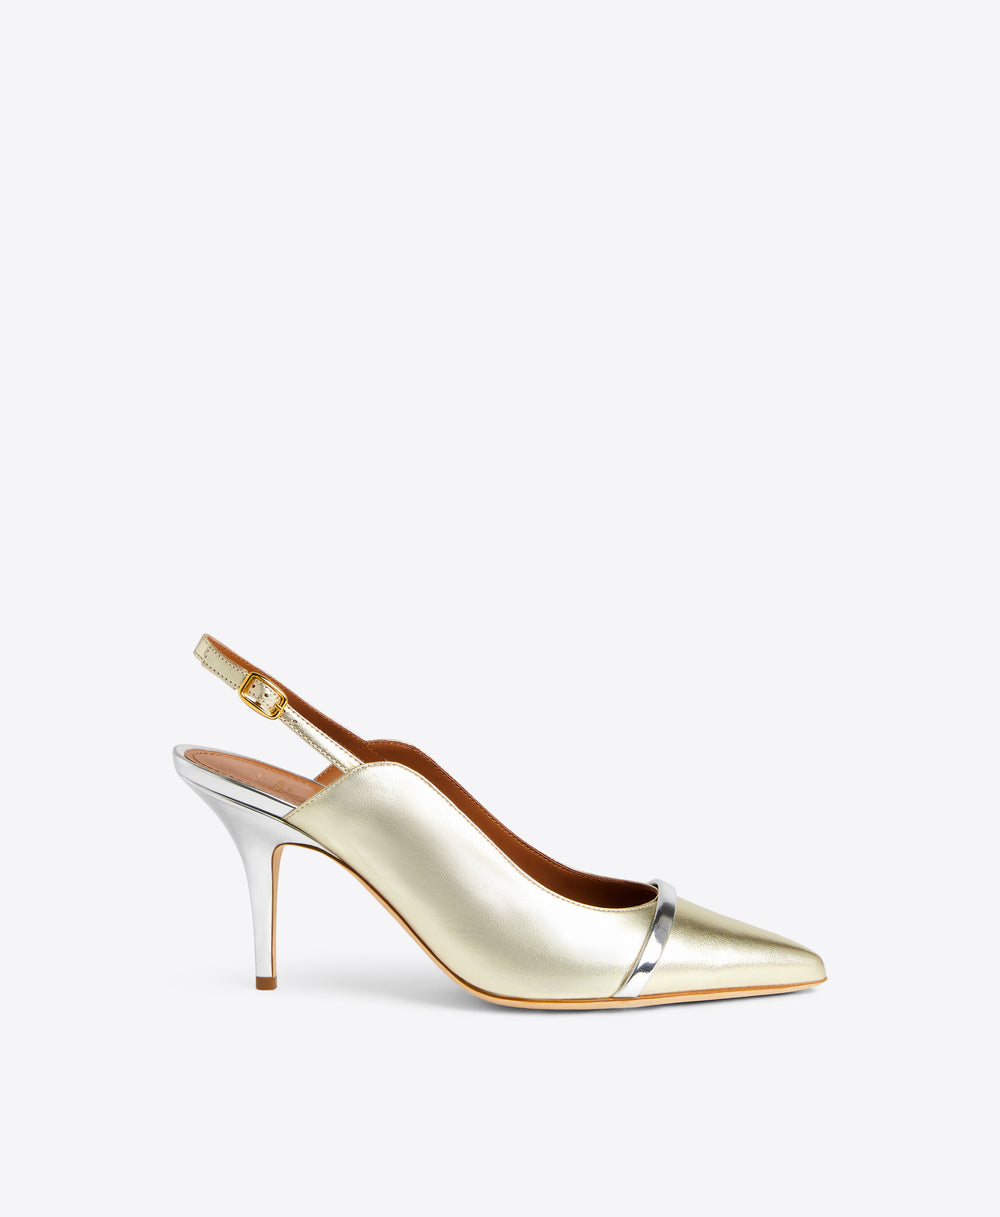 Malone Souliers Marion 70 Platino Metallic Leather Slingback Heels